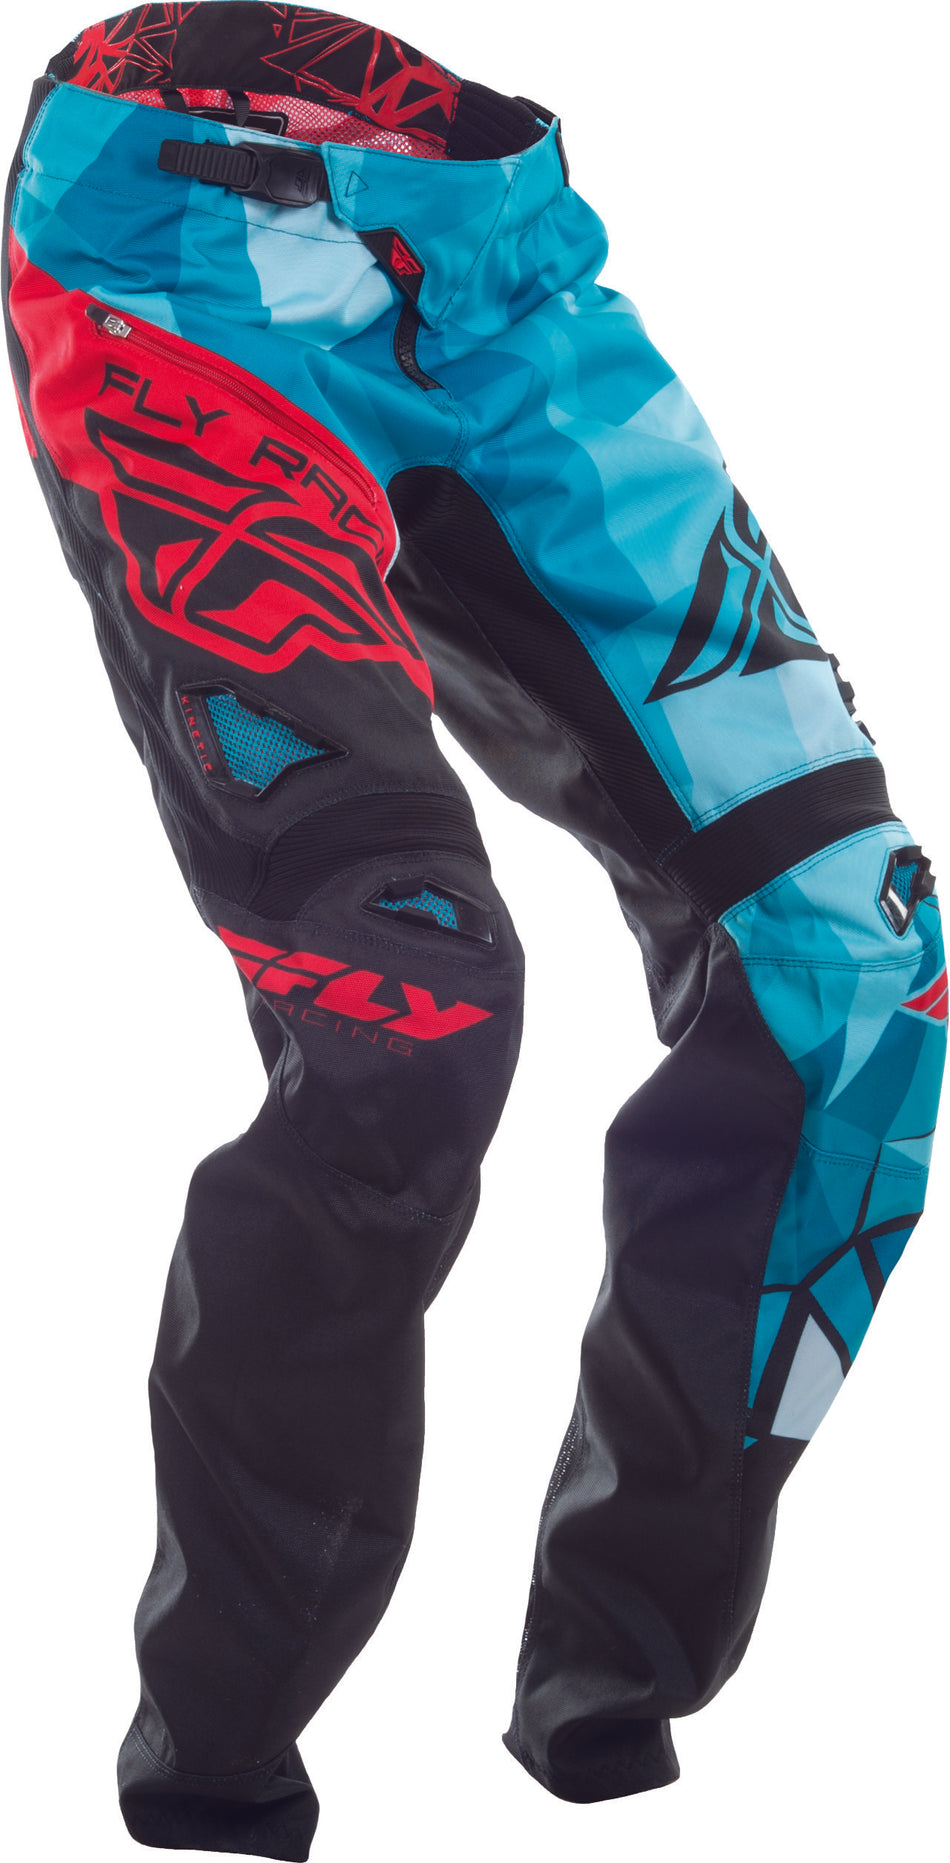 FLY RACING Bicycle Crux Pant Black/Teal/Red Sz 24 370-02924